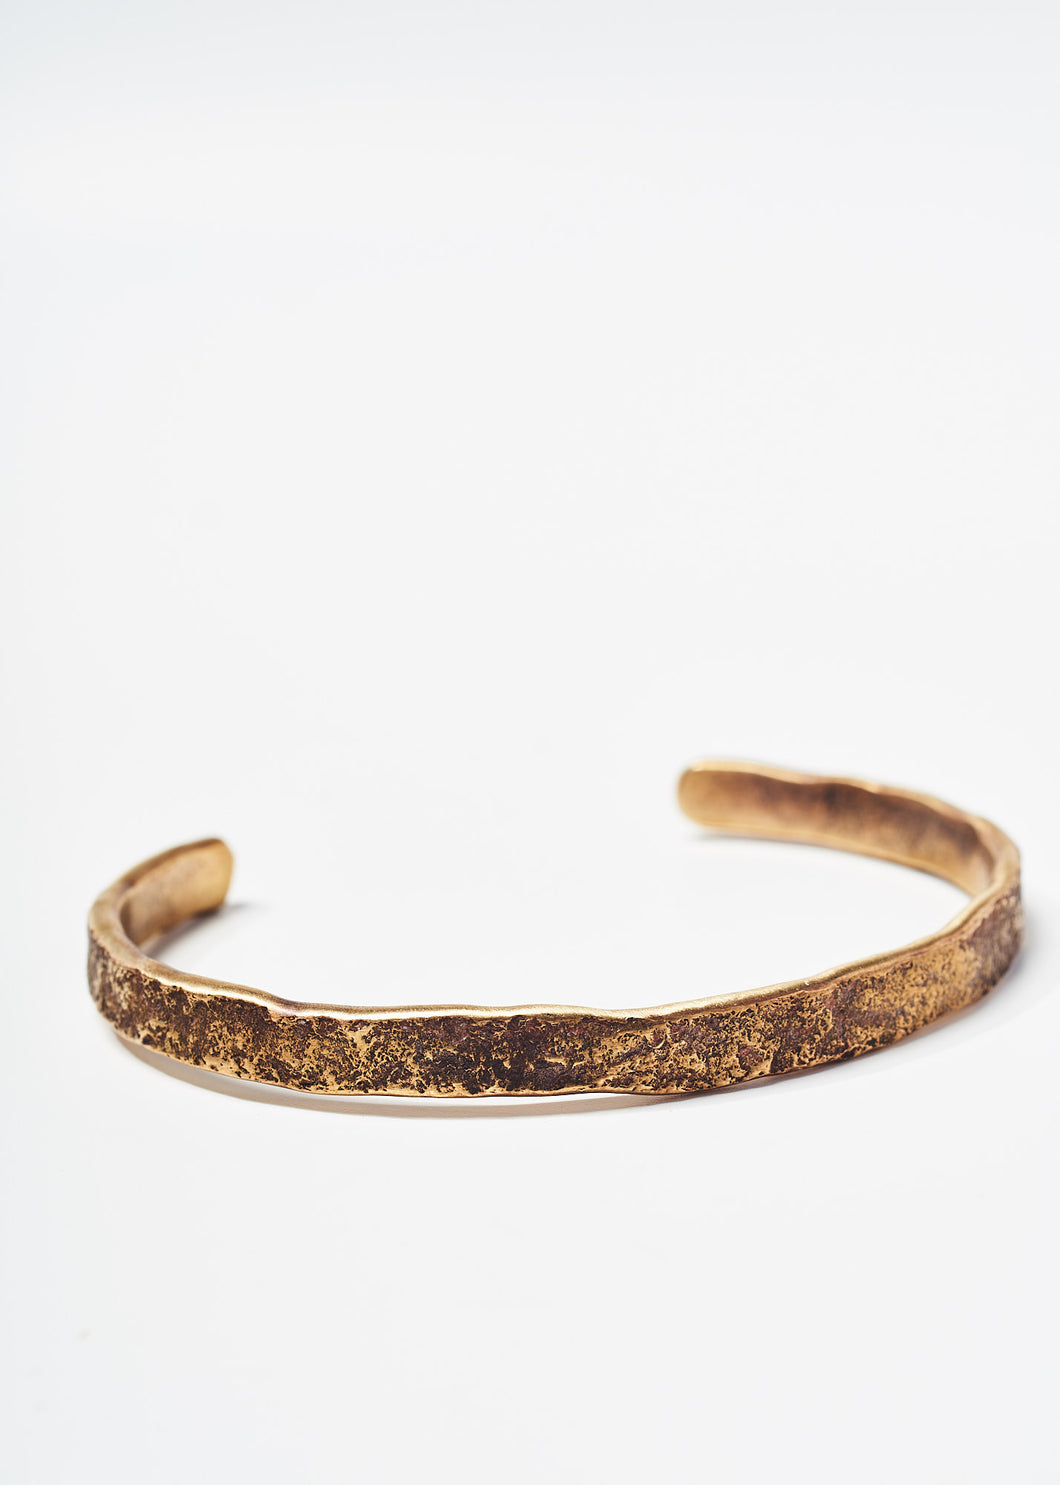 Oxidized Brass Cuff – CAUSE AND EFFECT BELTS